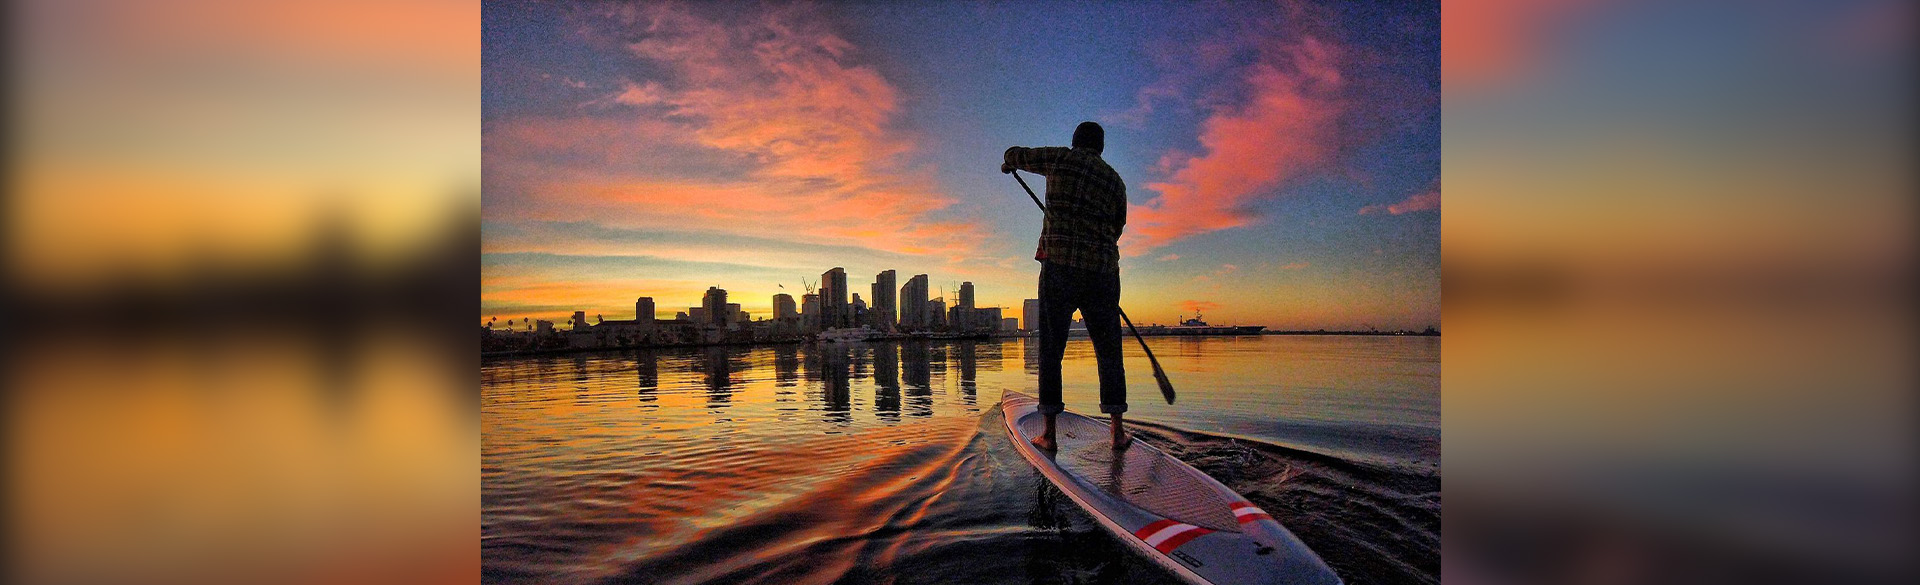 Disco's Paddle Surf - From $43 - San Diego, CA